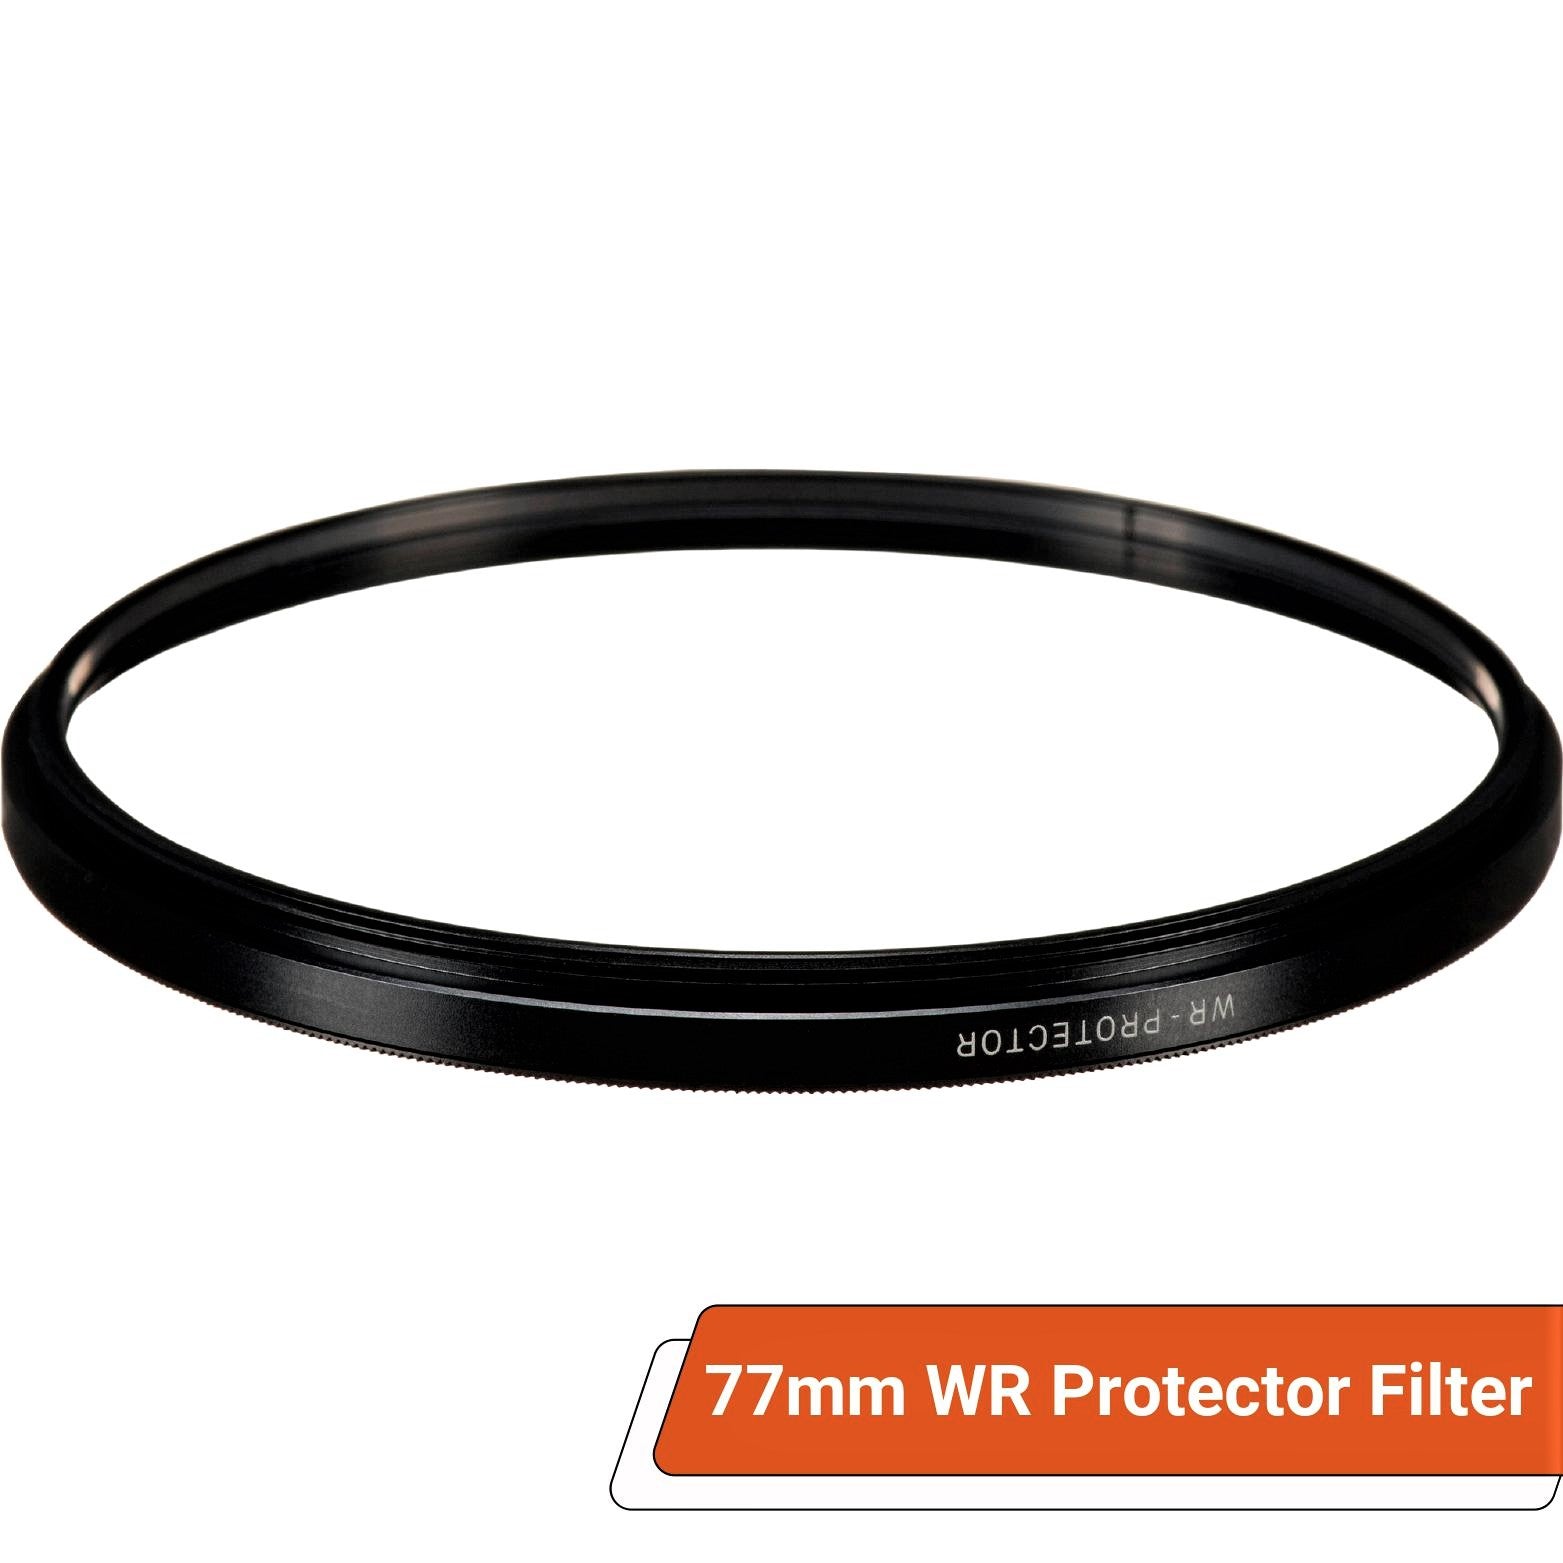 Sigma 77mm WR (Water Repellent) Protector Filter